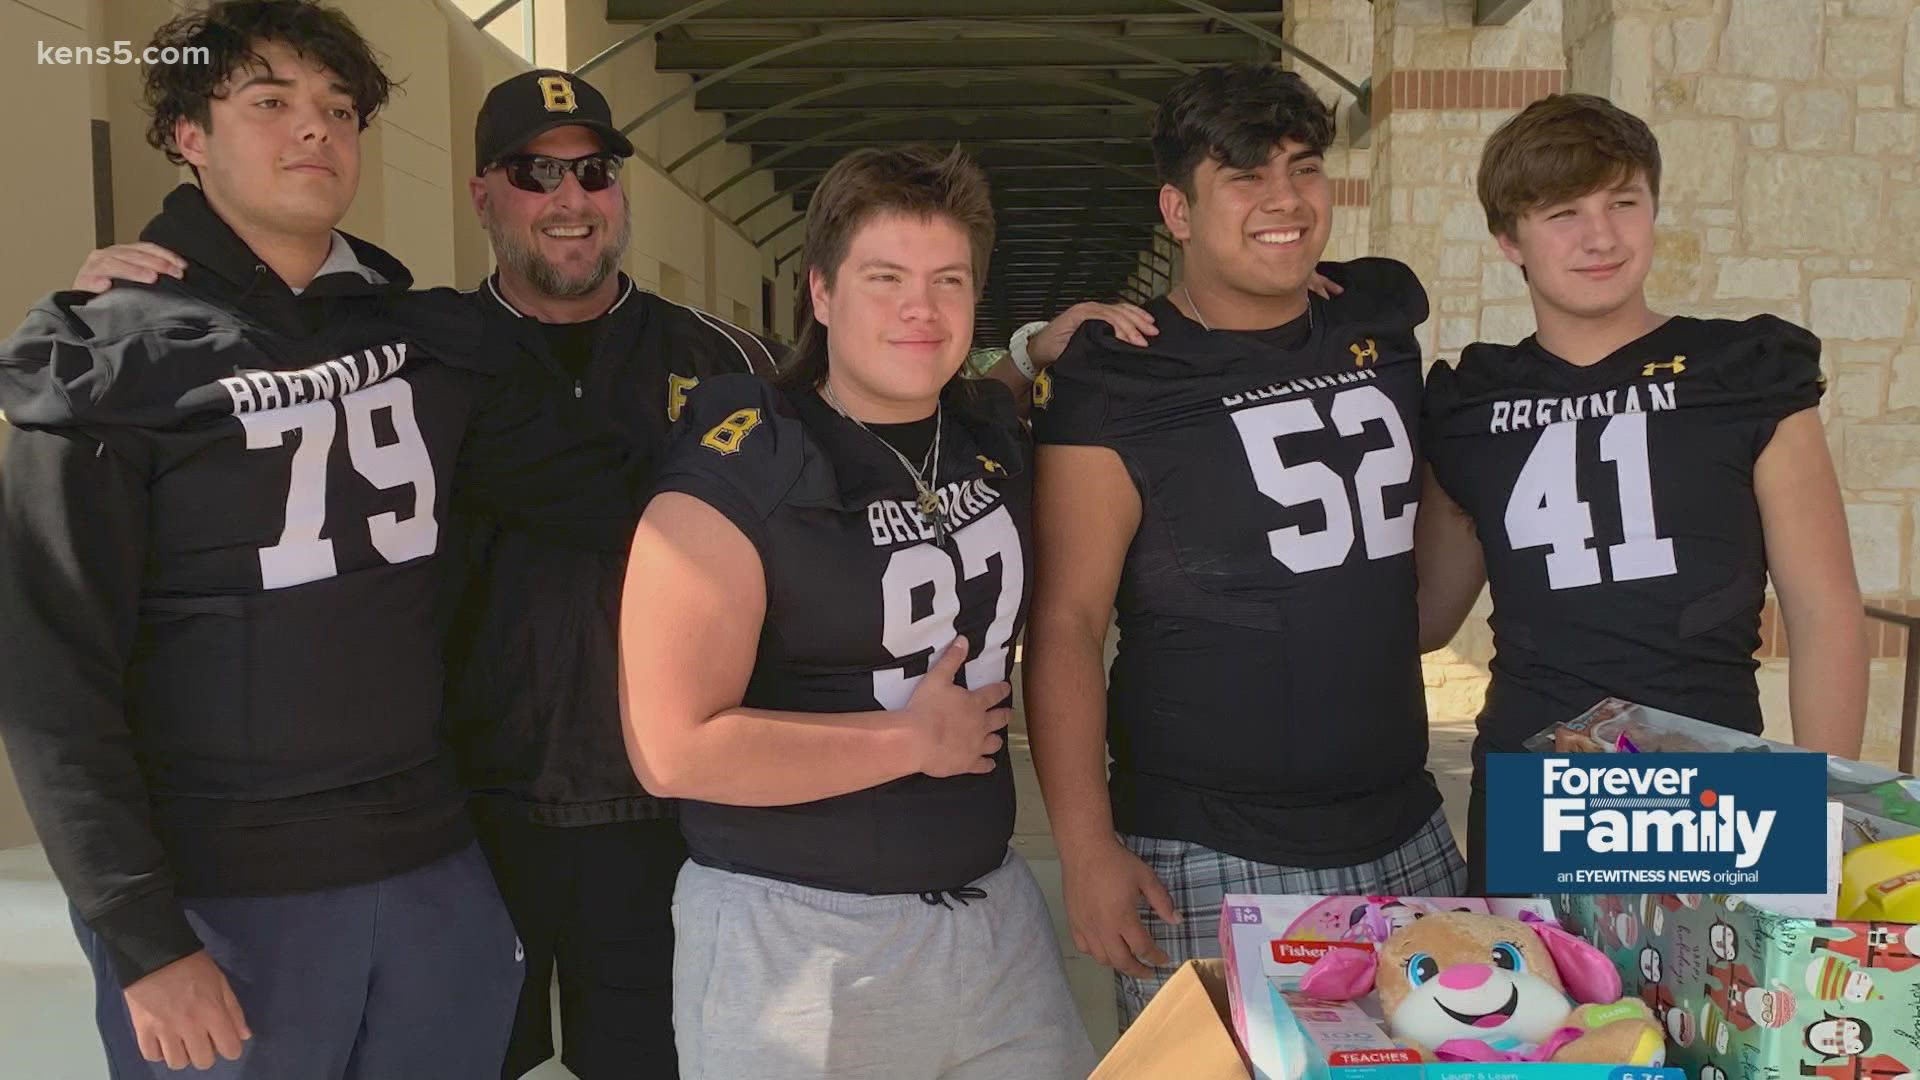 Several San Antonio area high school students came together to donate toys for children in need.